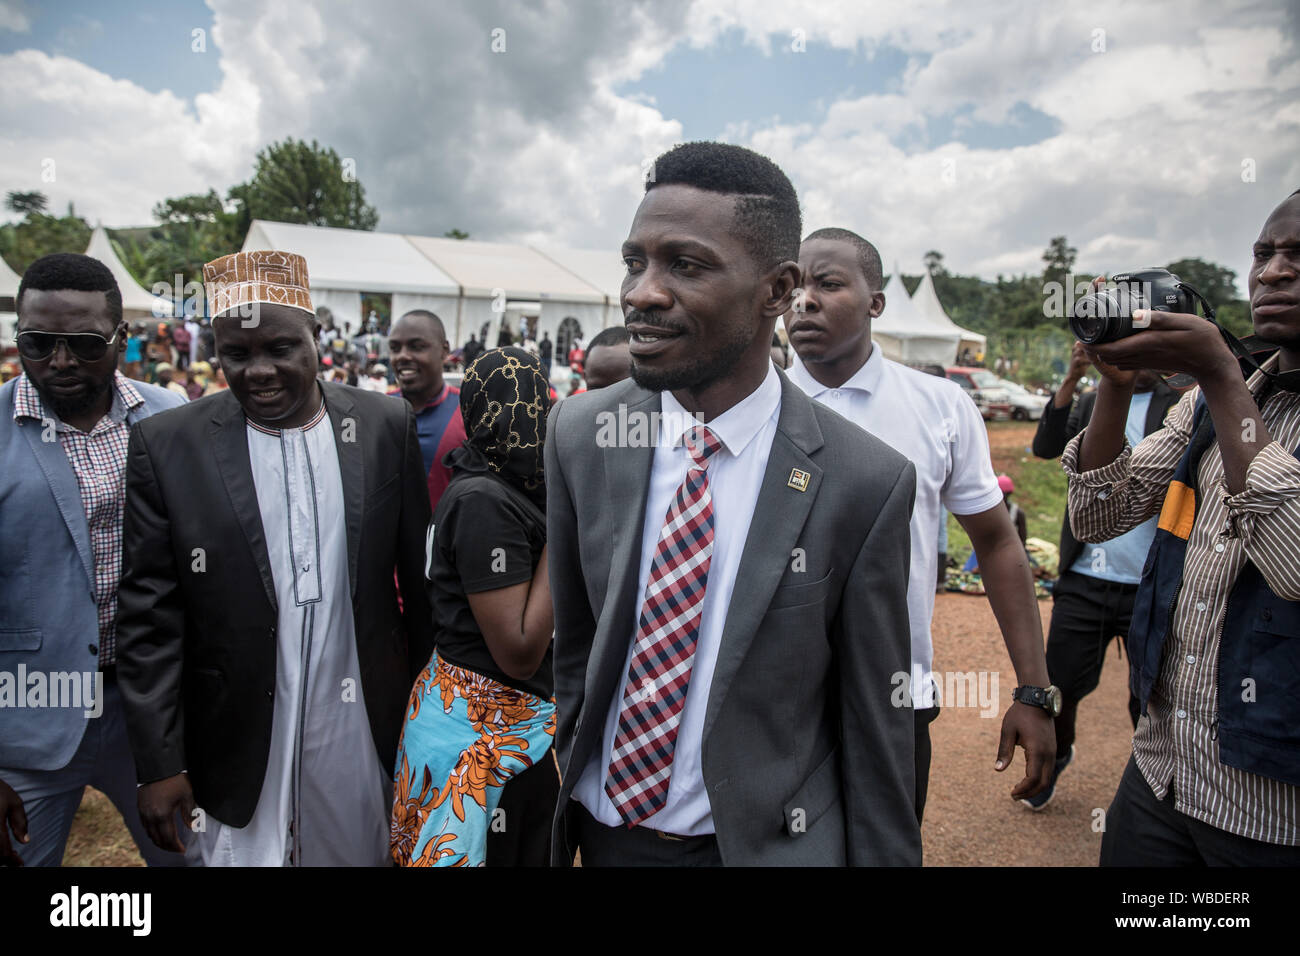 Bobi Wine during a campaign event in Gombe.Bobi Wine, whose real name is Robert Kyagulanyi, a popstar and opposition leader under the ‘people power’ campaign, will take on Uganda's longstanding president Yoweri Museveni in the 2021 election. Stock Photo